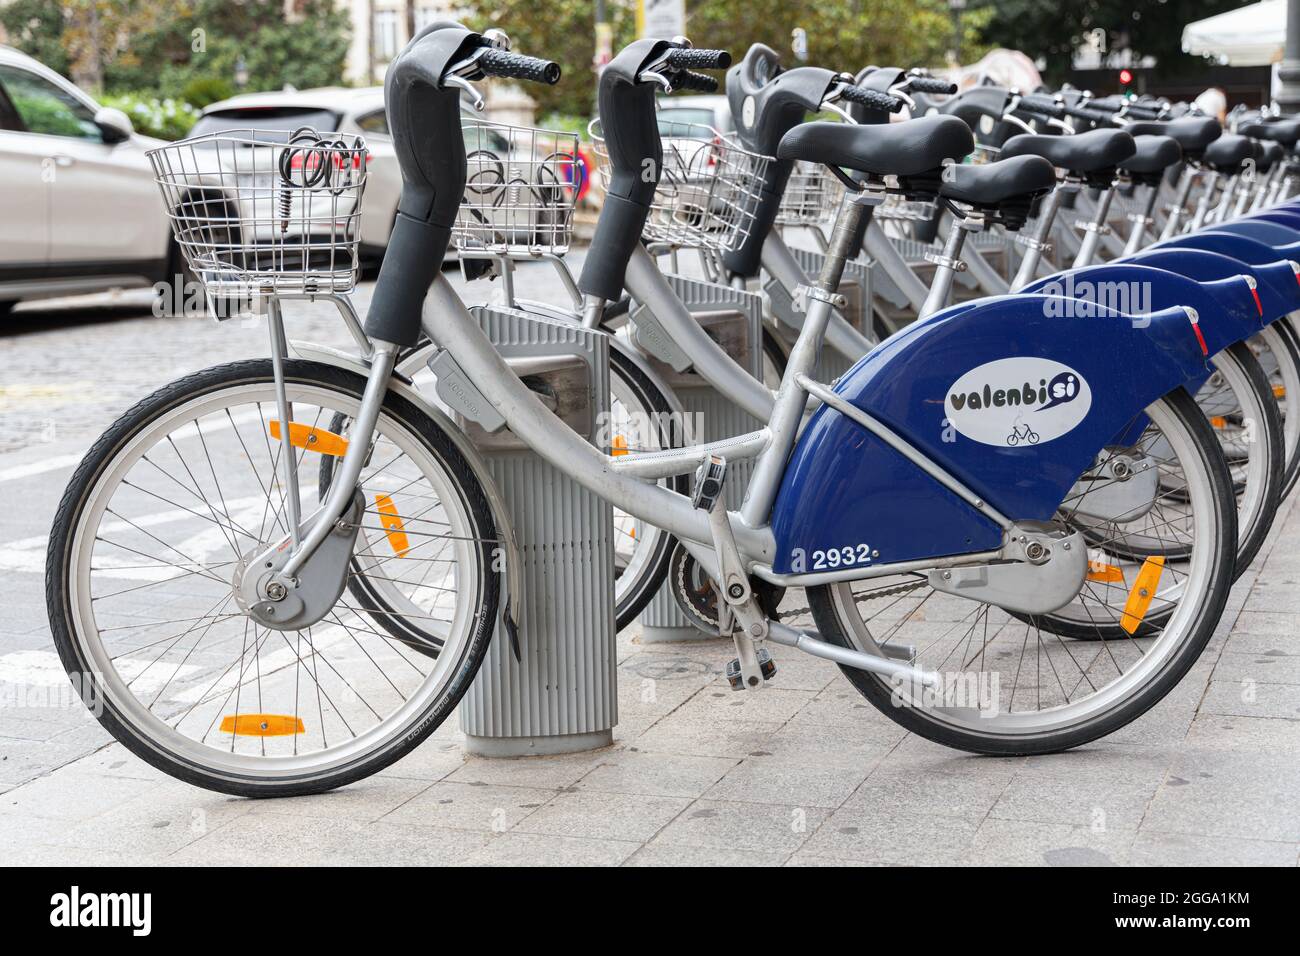 VALENCIA, SPAIN - AUGUST 30, 2021: Valenbisi public bicycle sharing system  Stock Photo - Alamy